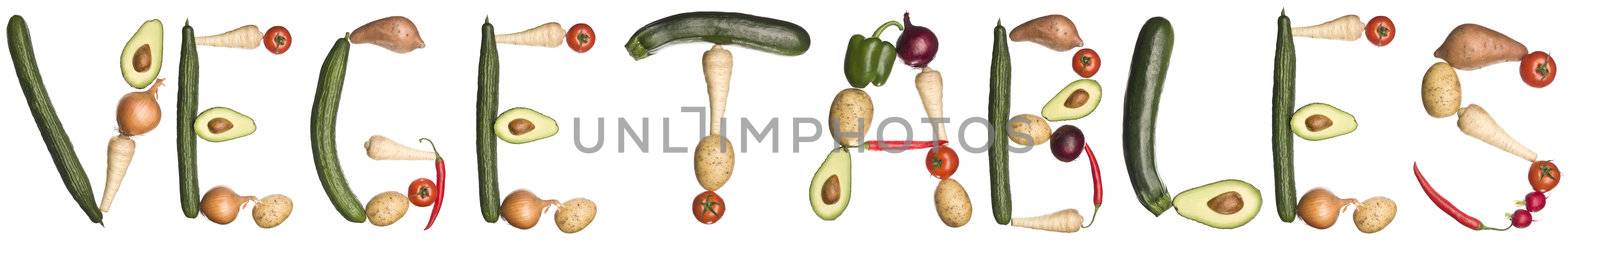 The word 'Vegetables' made out of vegetables isolated on a white background